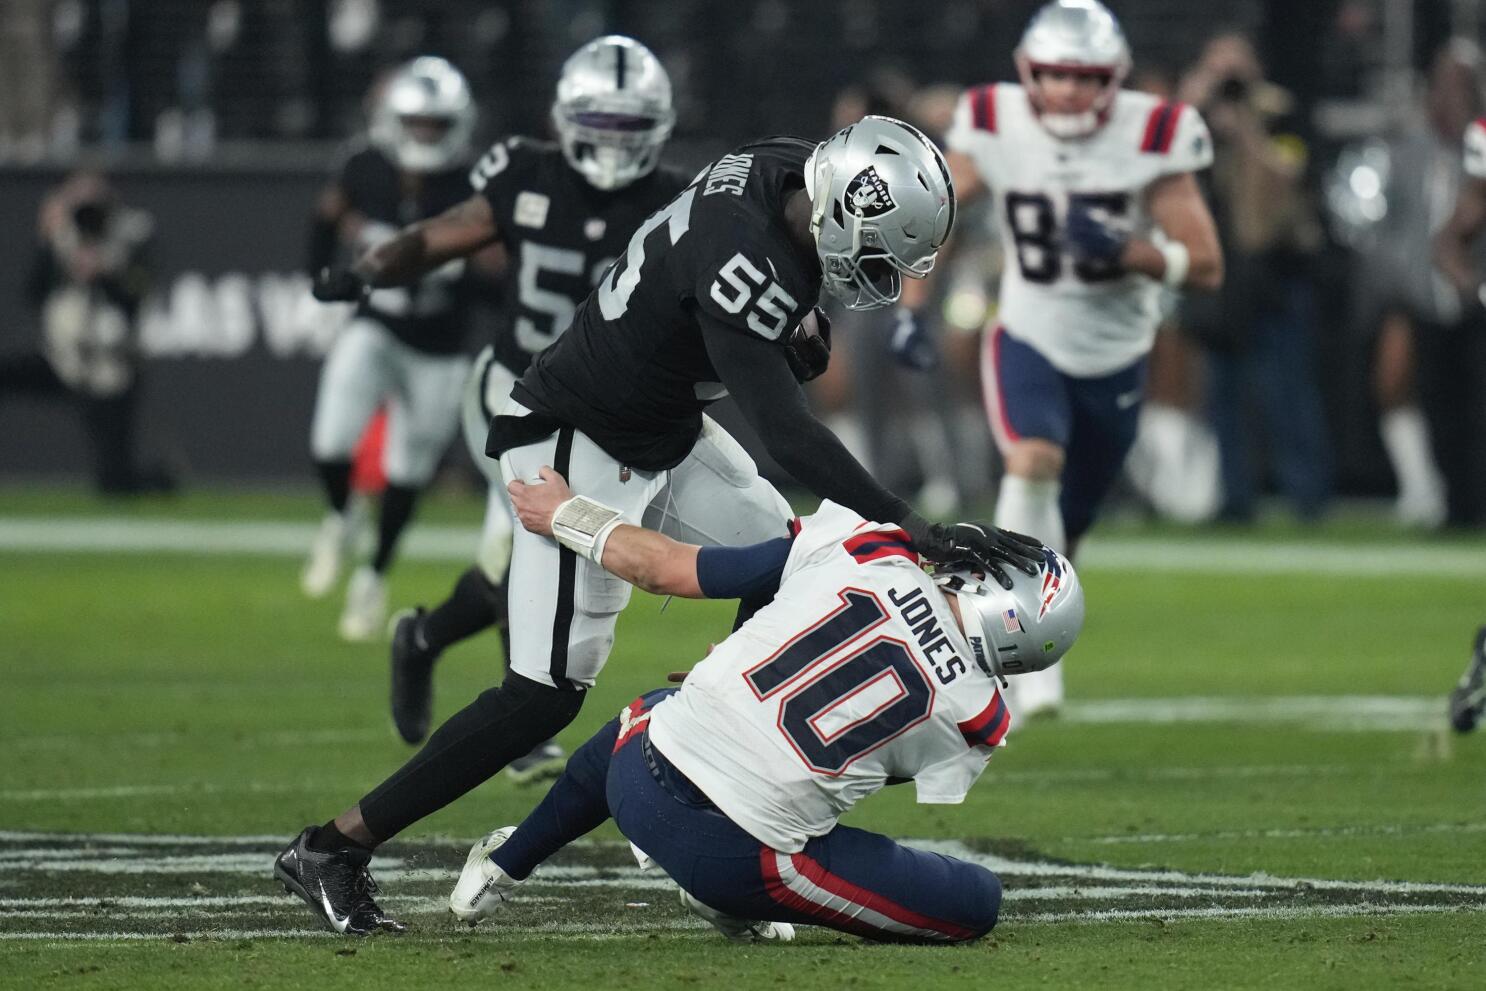 NFL roundup: Patriots fumble away game to Raiders on last play